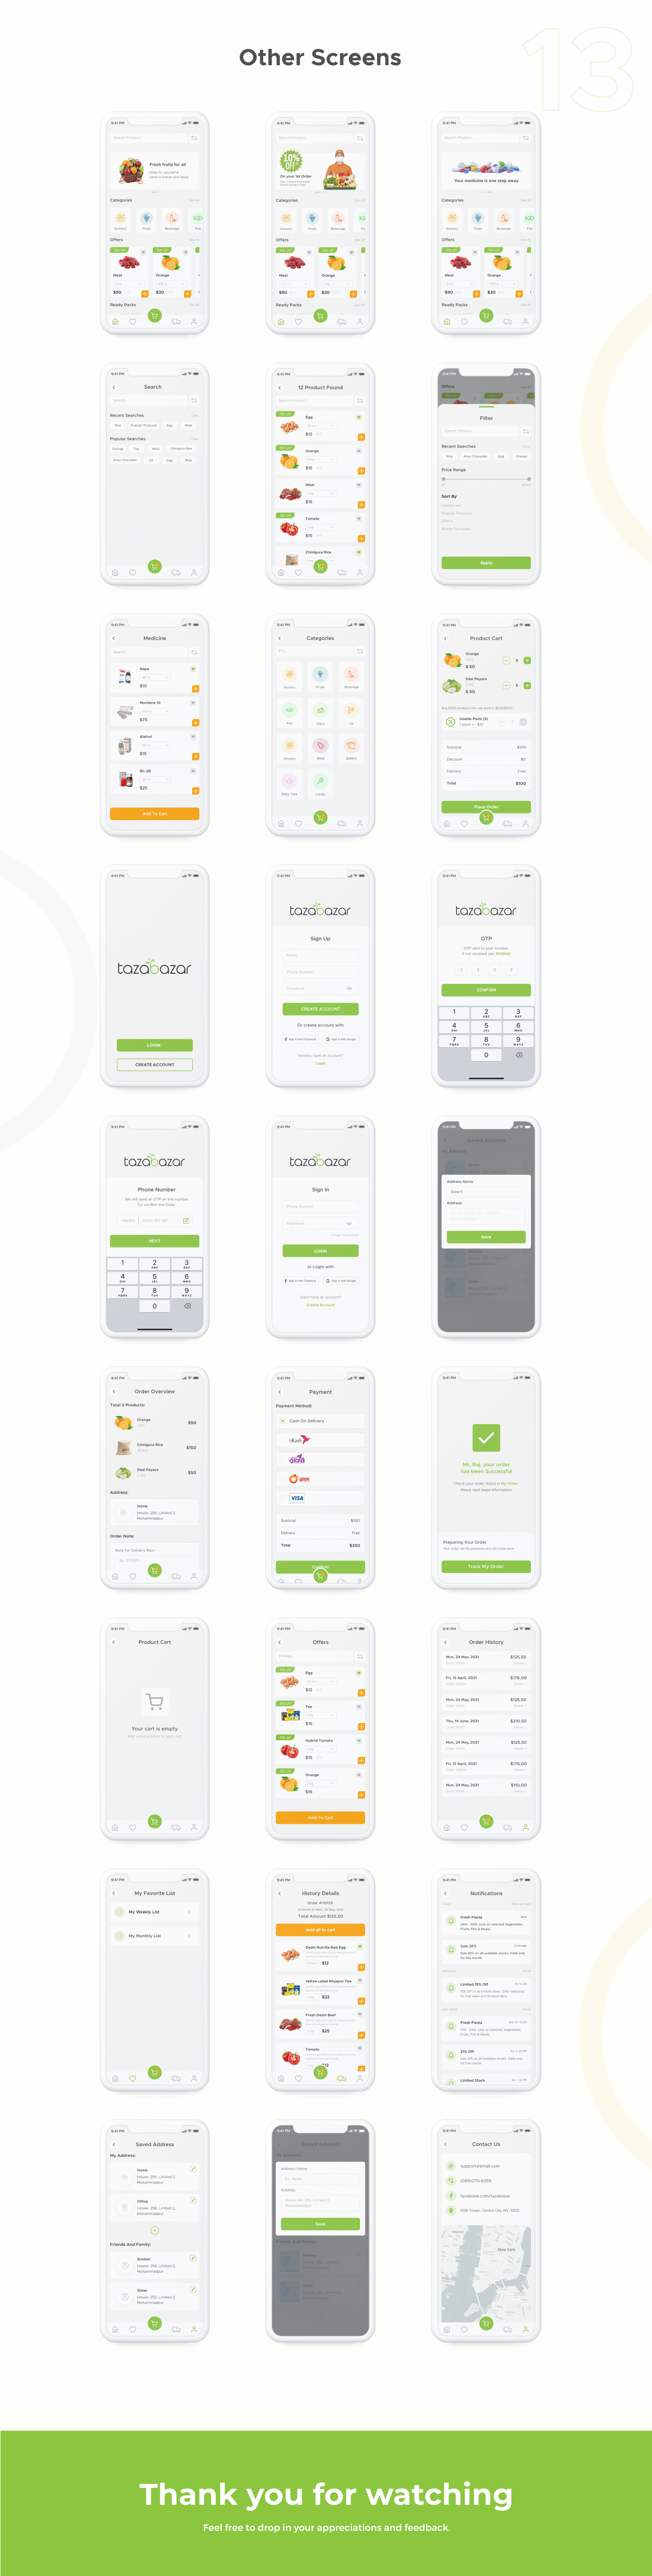 Other Screens | Grocery Mobile App UI UX Research Case Study Project 